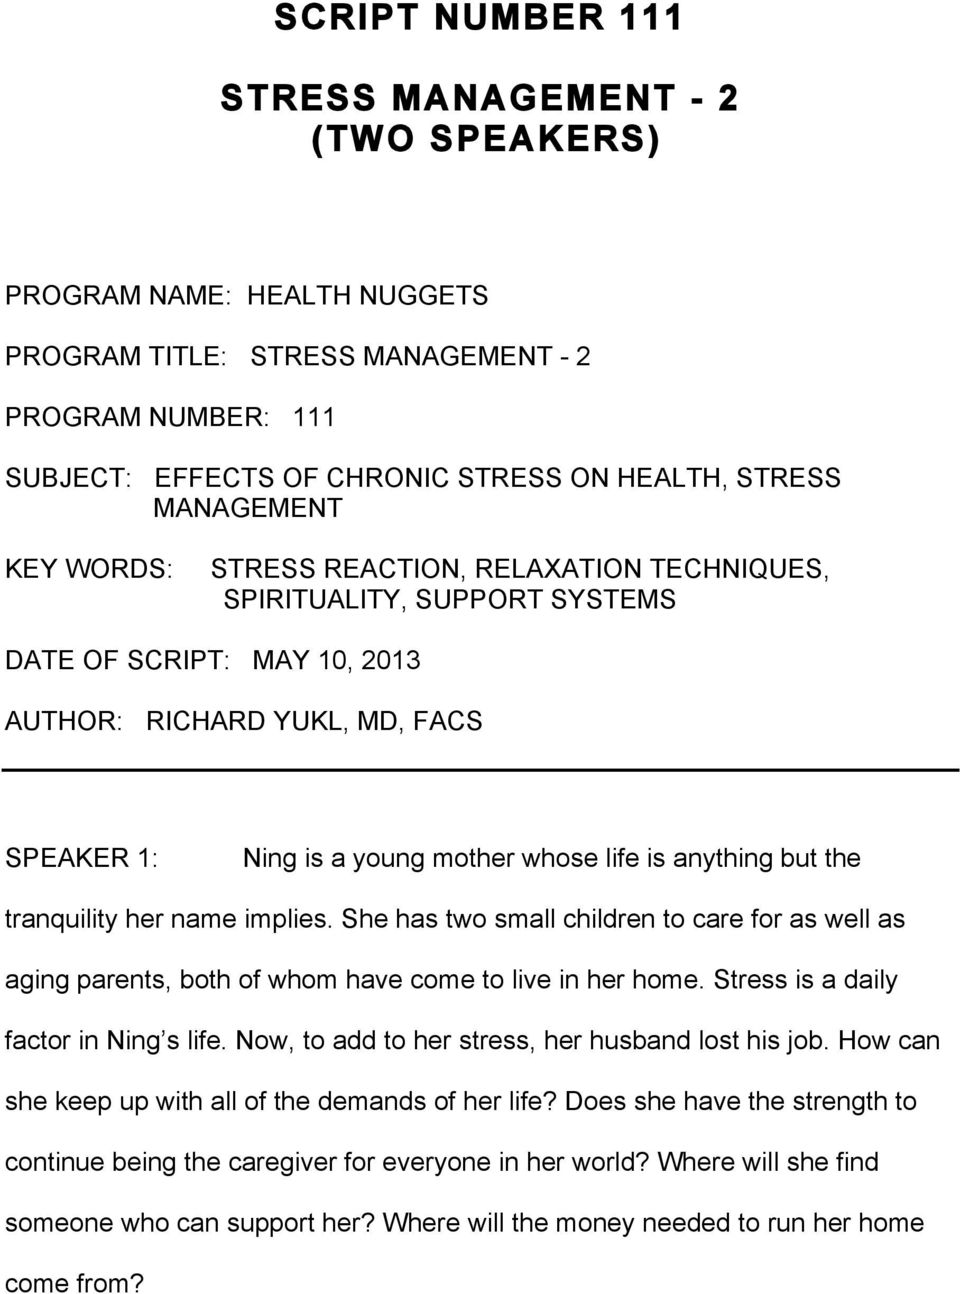 but the tranquility her name implies. She has two small children to care for as well as aging parents, both of whom have come to live in her home. Stress is a daily factor in Ning s life.